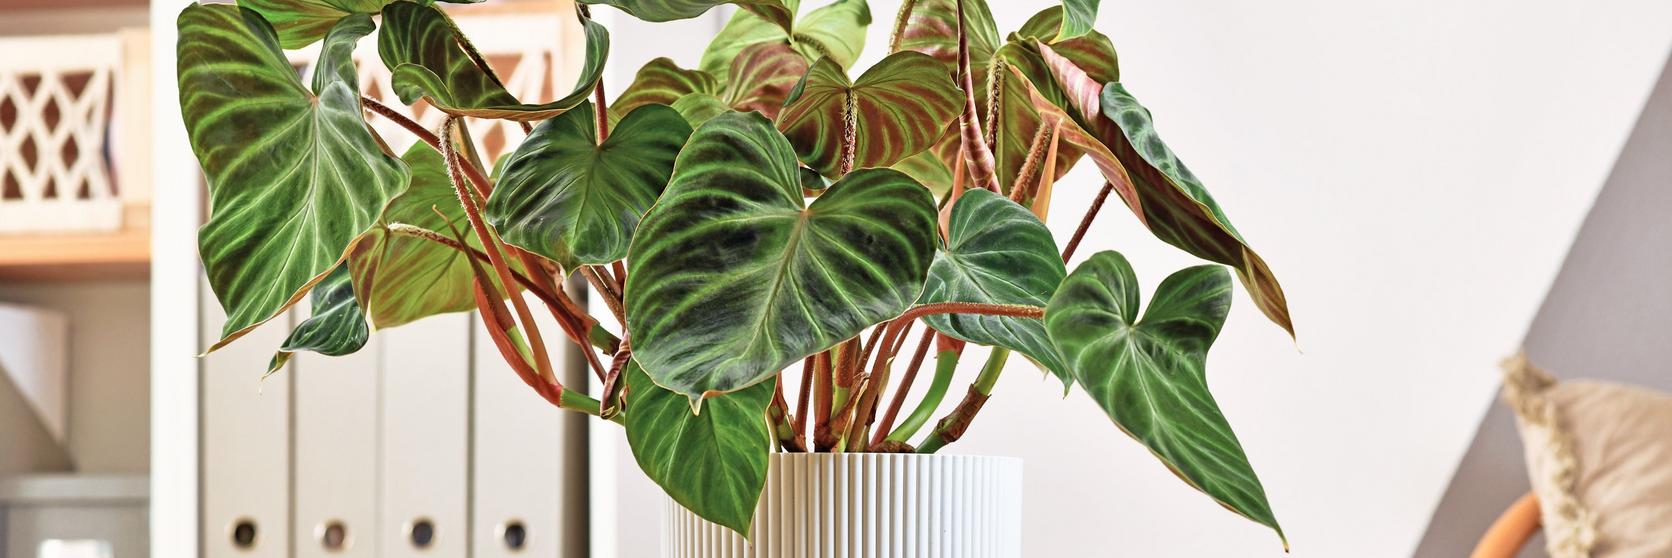 ff_philodendron_indoors